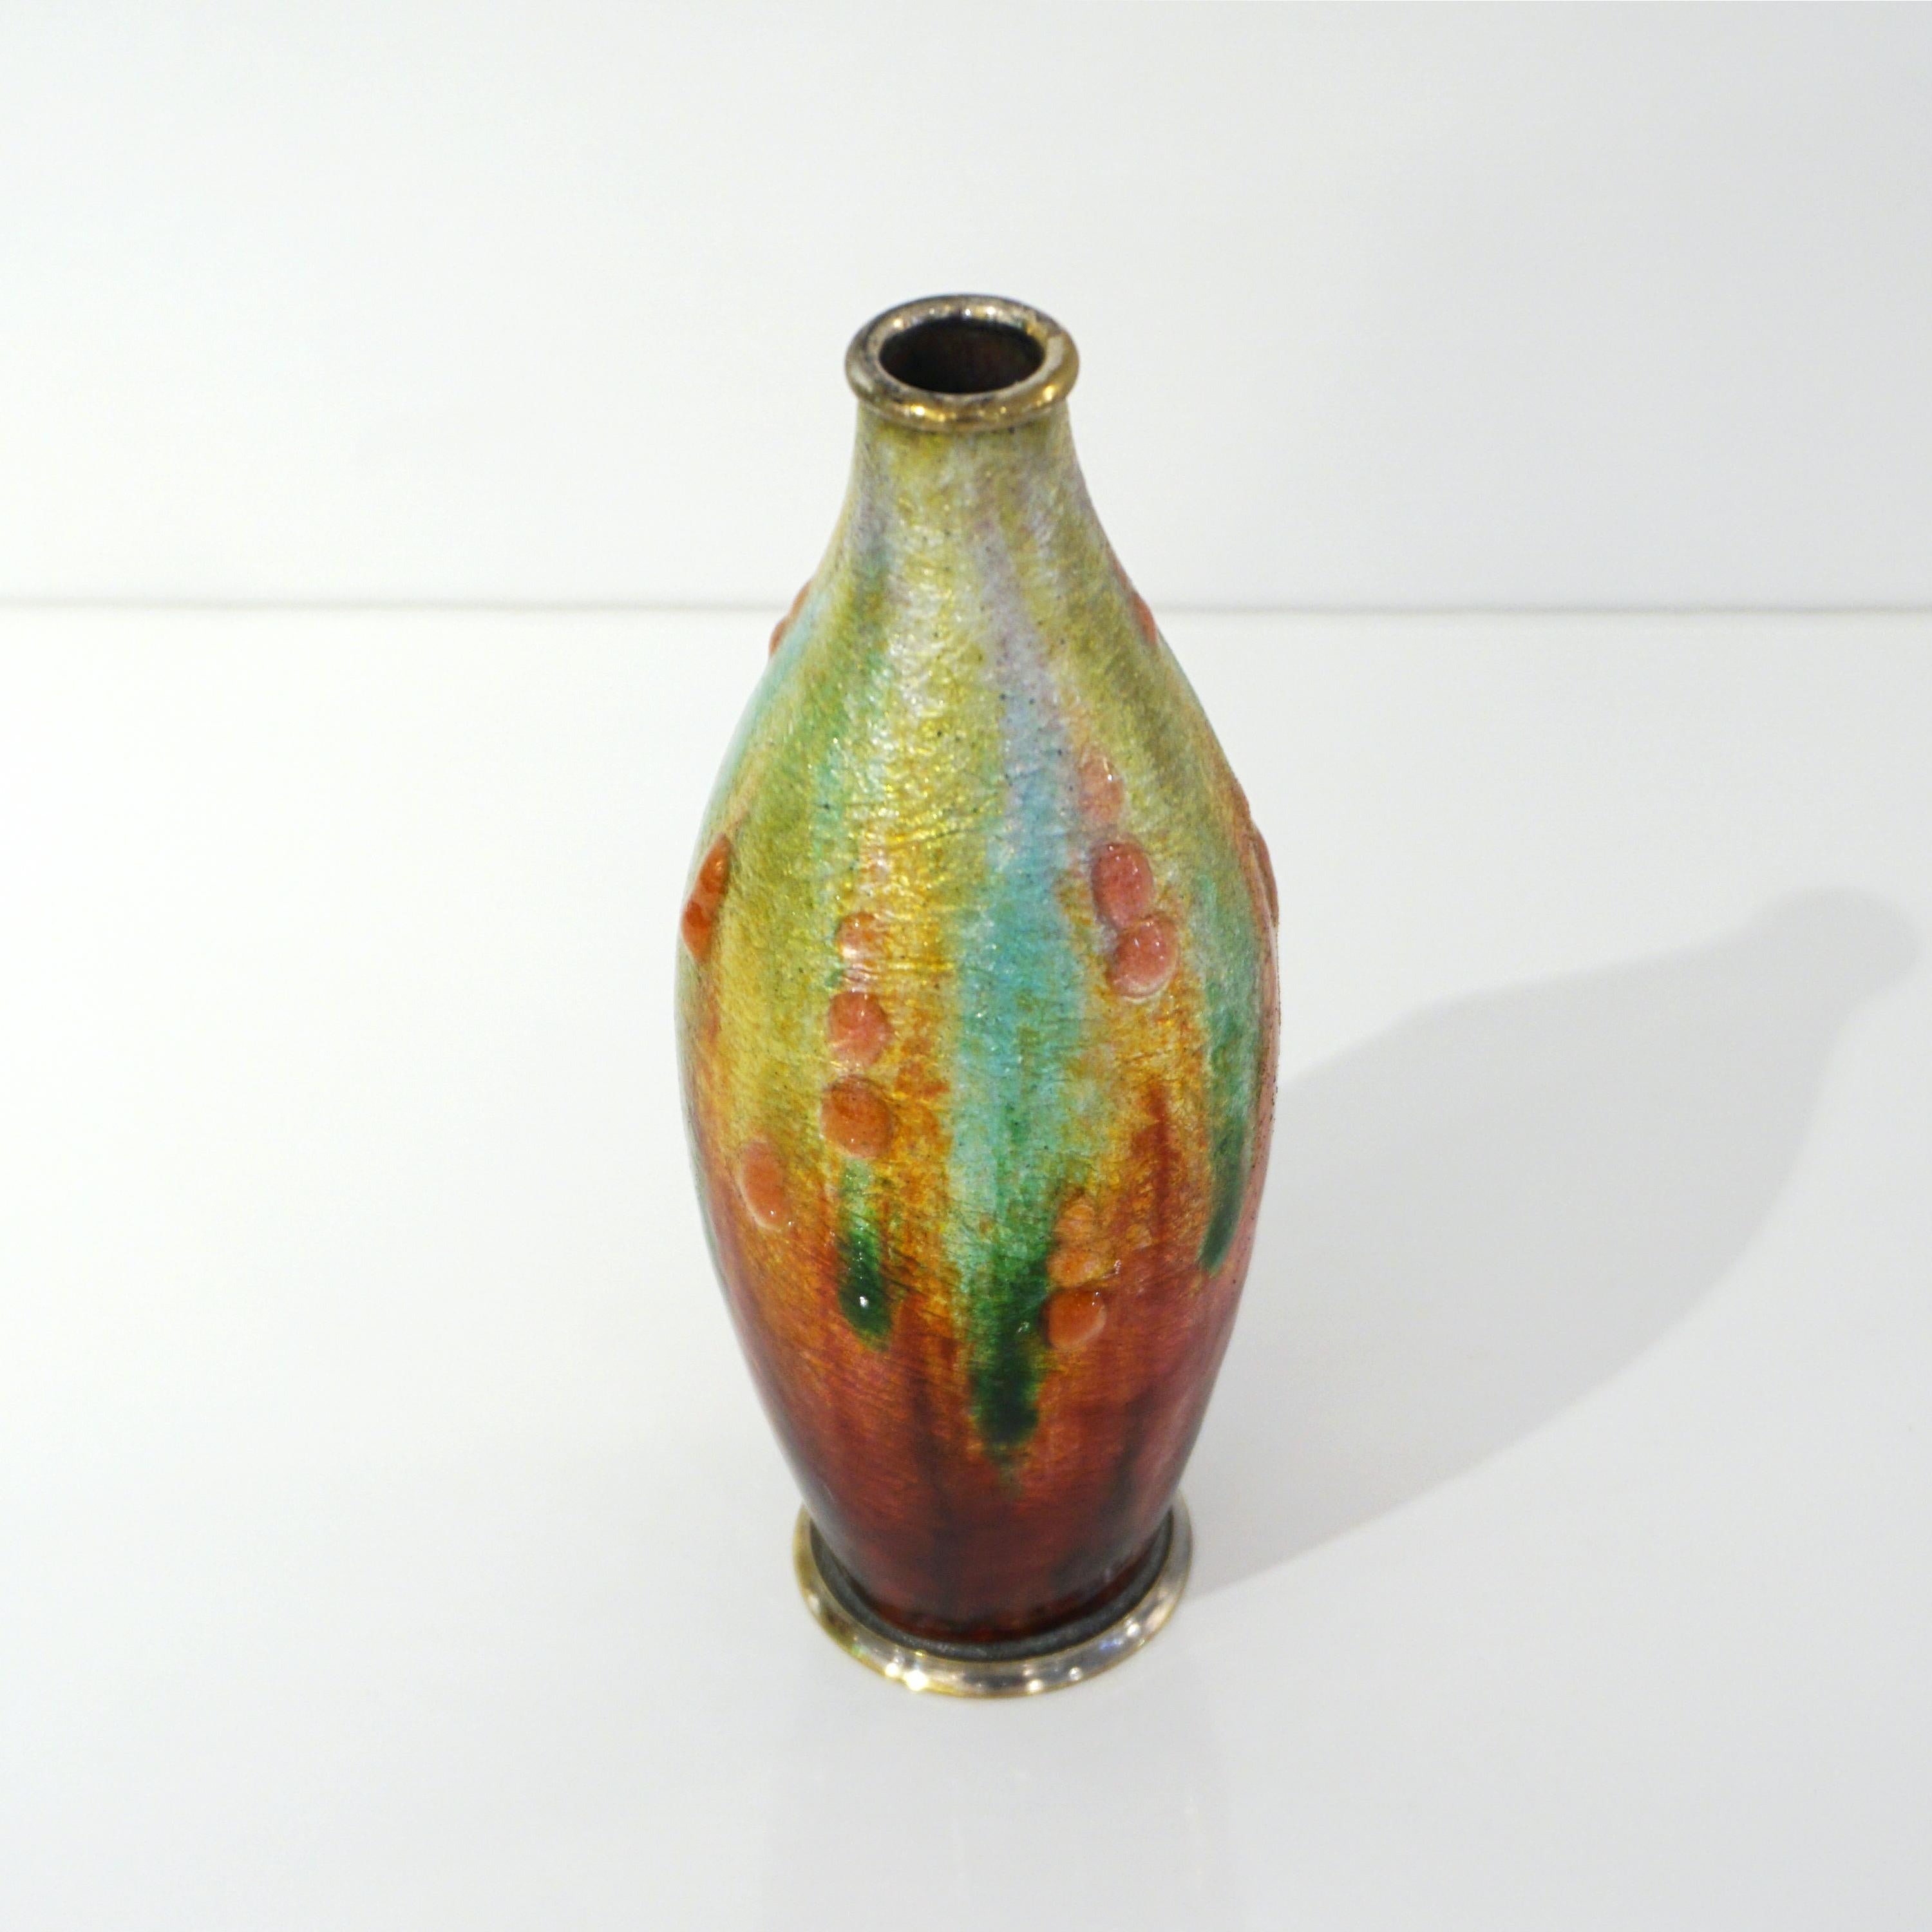 Early 20th century, Work of Art by the French artist Camille Fauré (1872-1952), this vase in copper is entirely covered in thick vibrant iridescent enamels in gold yellow, red, orange, and lime green tones, the drip decor creates an abstract